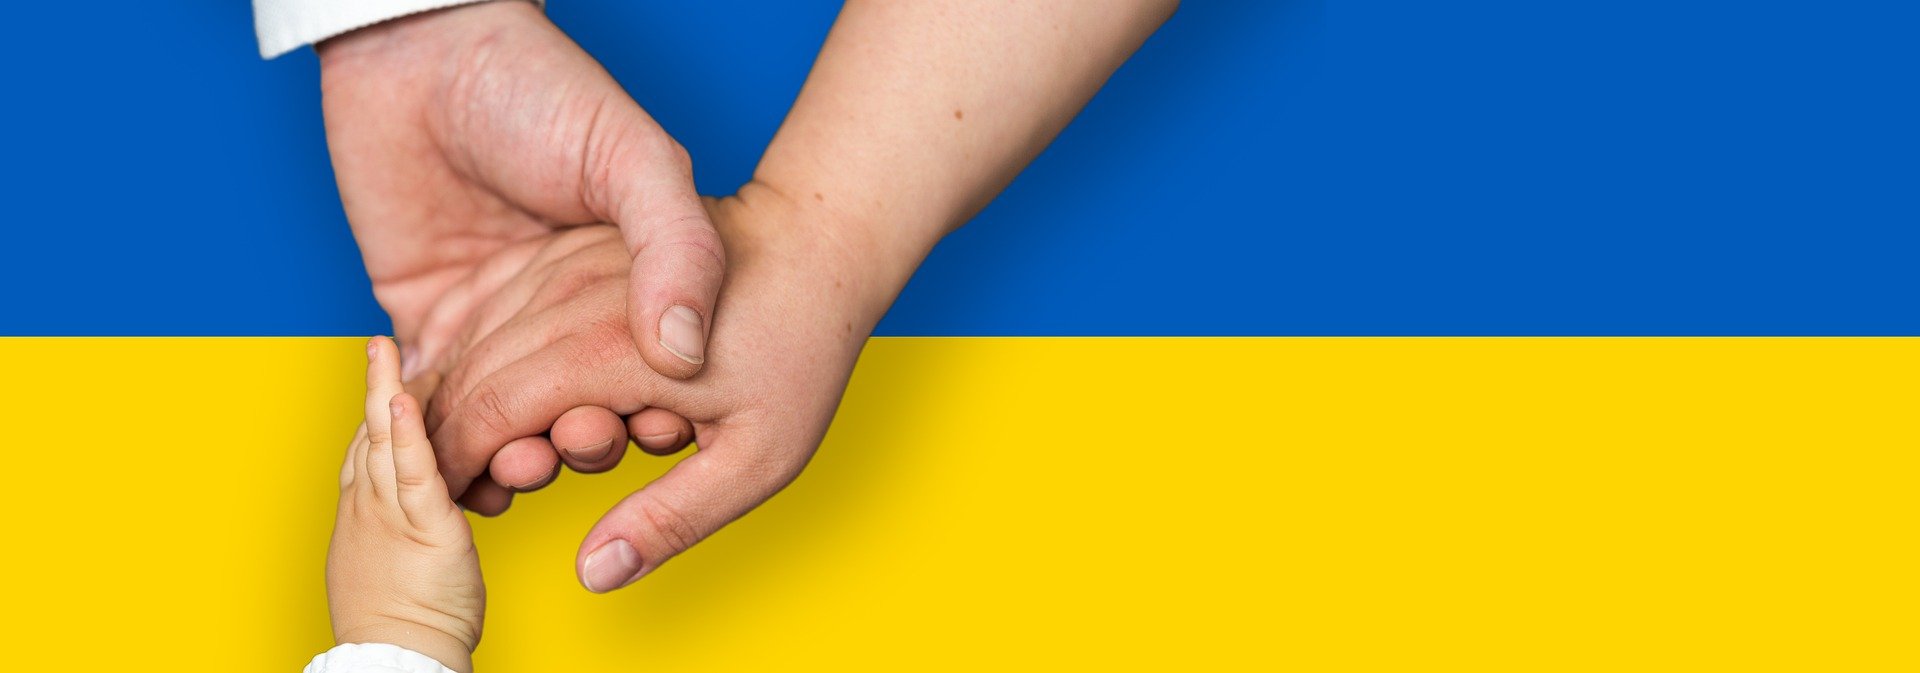 Opinion: Ukrainian refugees are vulnerable to trafficking and abuse – we must protect them